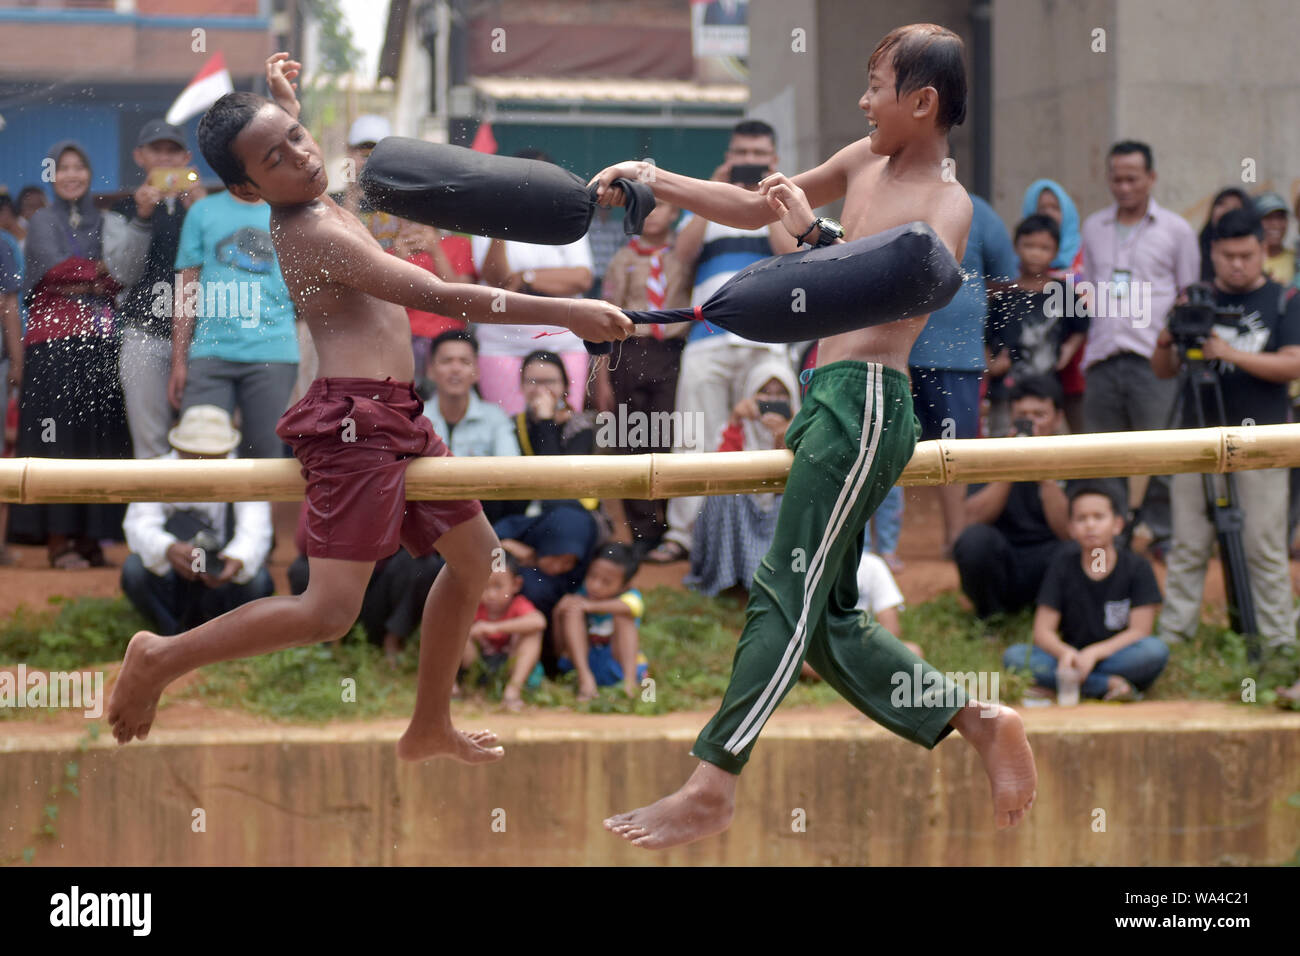 Boys slugging it out in a pillow fight during the celebrations.Indonesian people celebrated the country's 74th Independence Day, marking the anniversary of the declaration of independence from Dutch-colonial rule in the aftermath of World War II, with various traditional competitions as a reflection of the spirit of struggle. Stock Photo